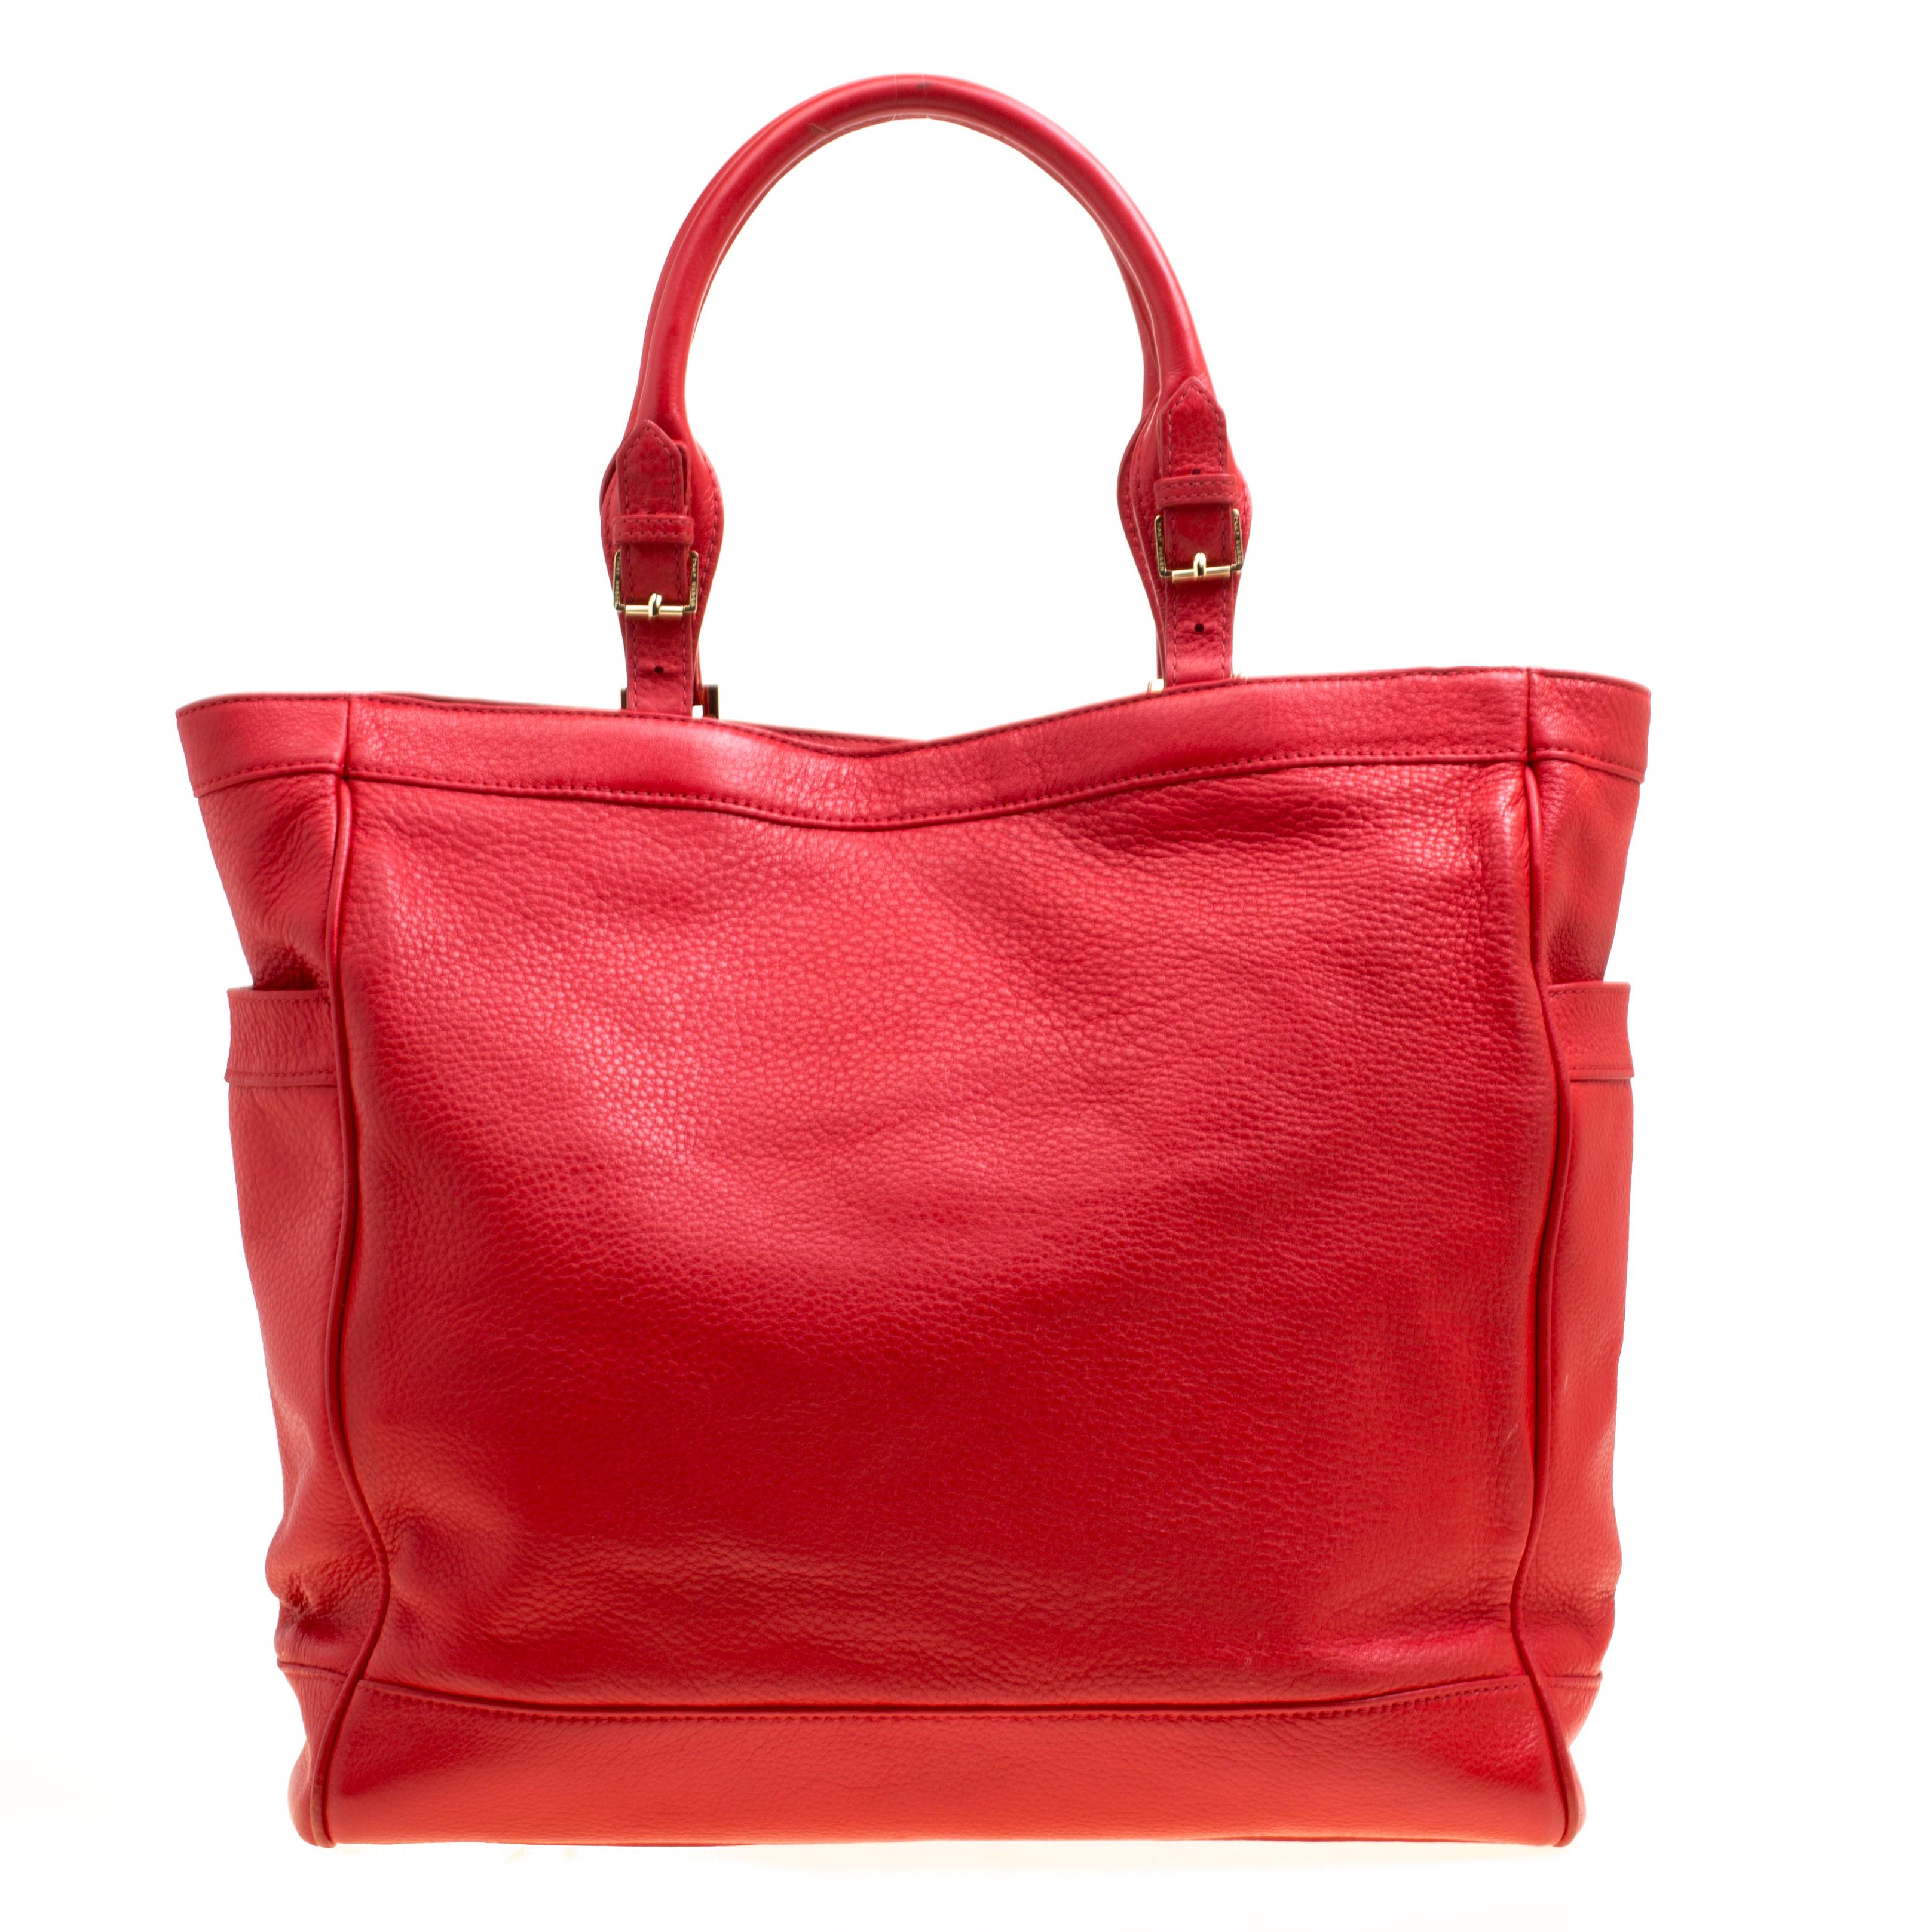 This beautiful, red Tory Burch beauty will give your look a touch of class and elegance. It is crafted from smooth leather and is adorned with logo accents on the front and two slip pockets on each side. The well-designed exterior is coupled with